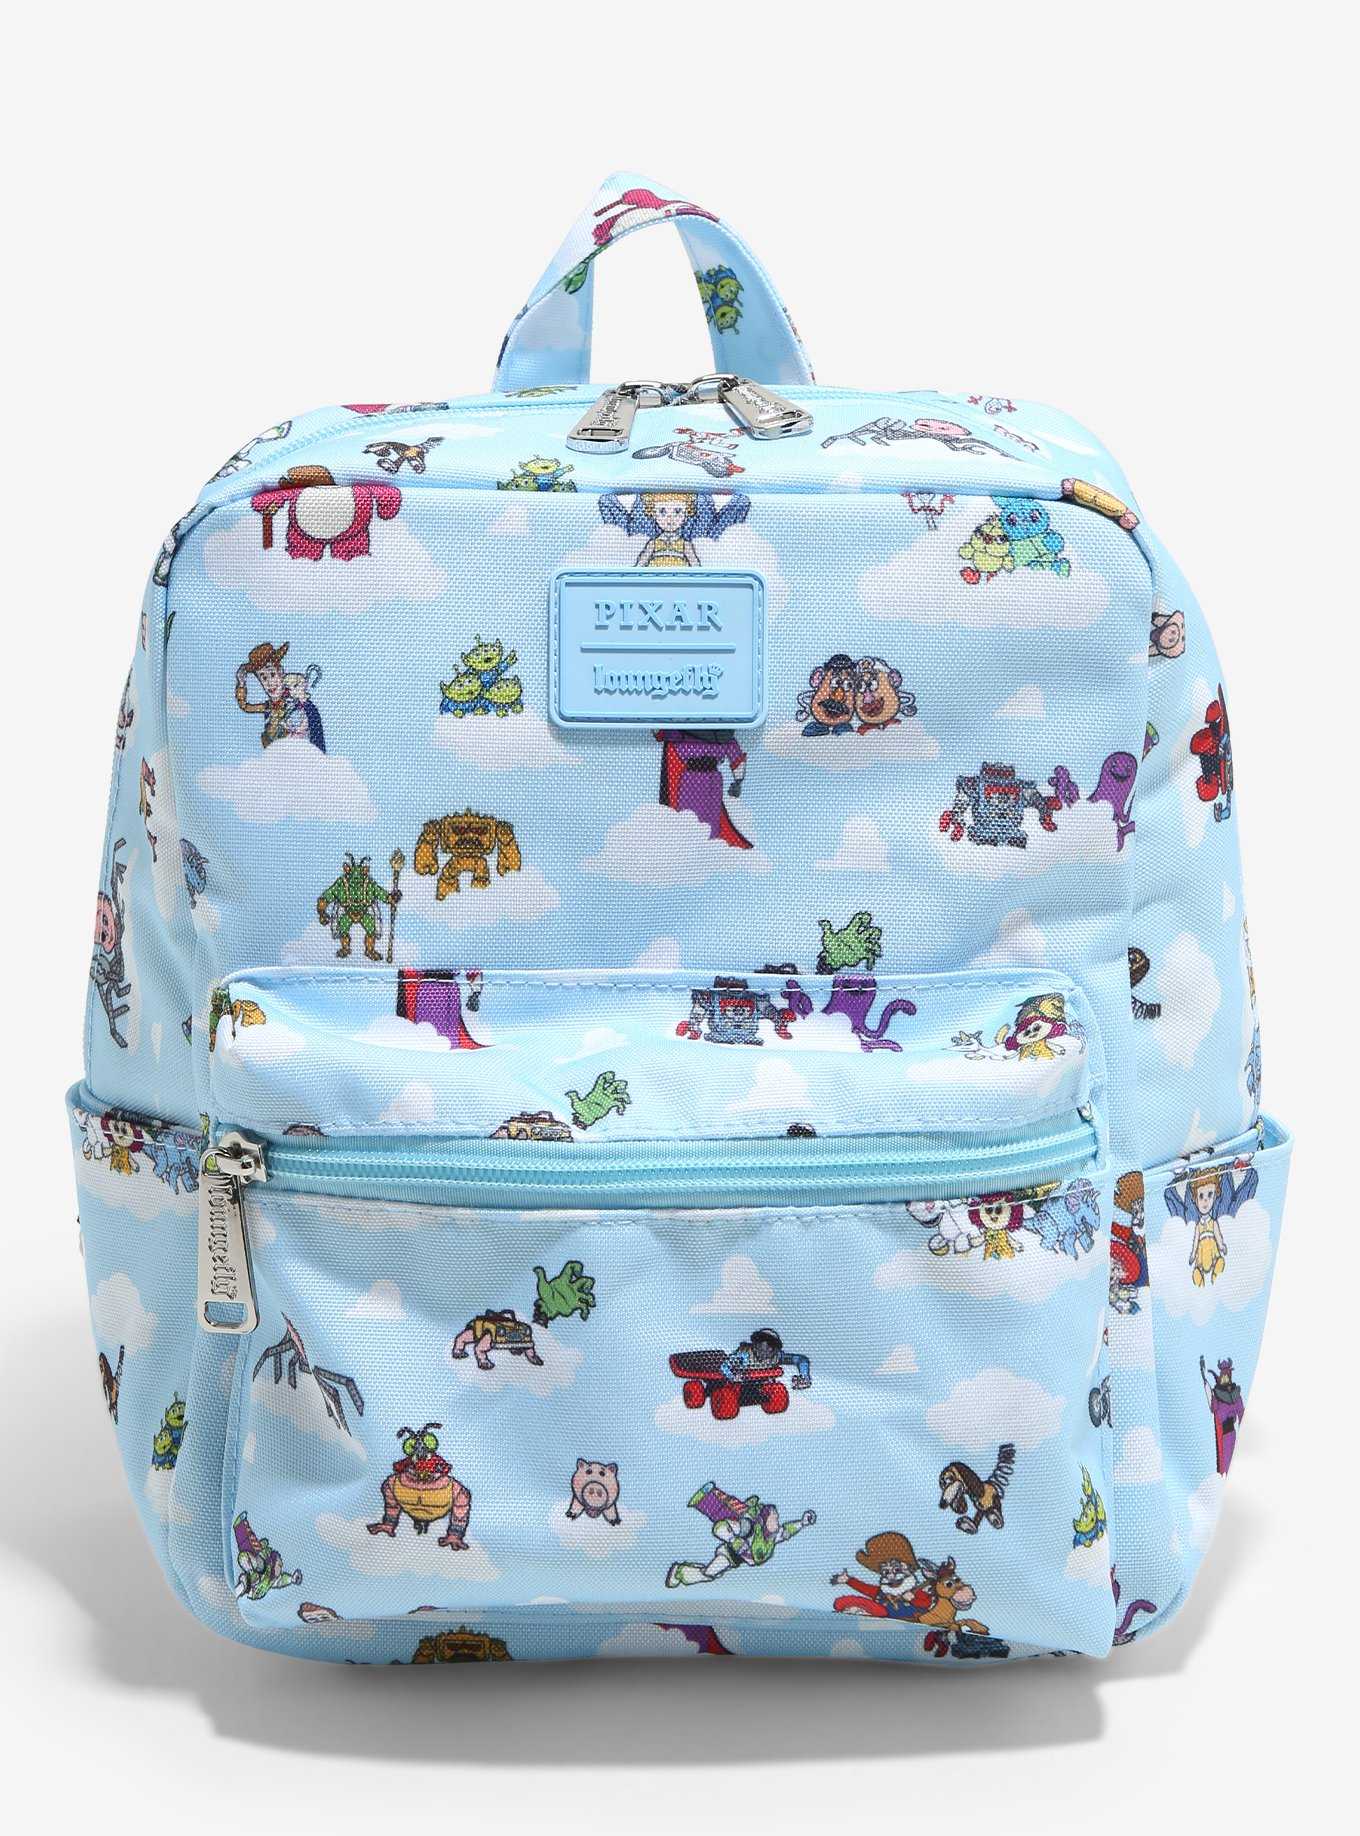 Loungefly Disney Pixar Toy Story Characters Allover Print Nylon Mini Backpack, , hi-res